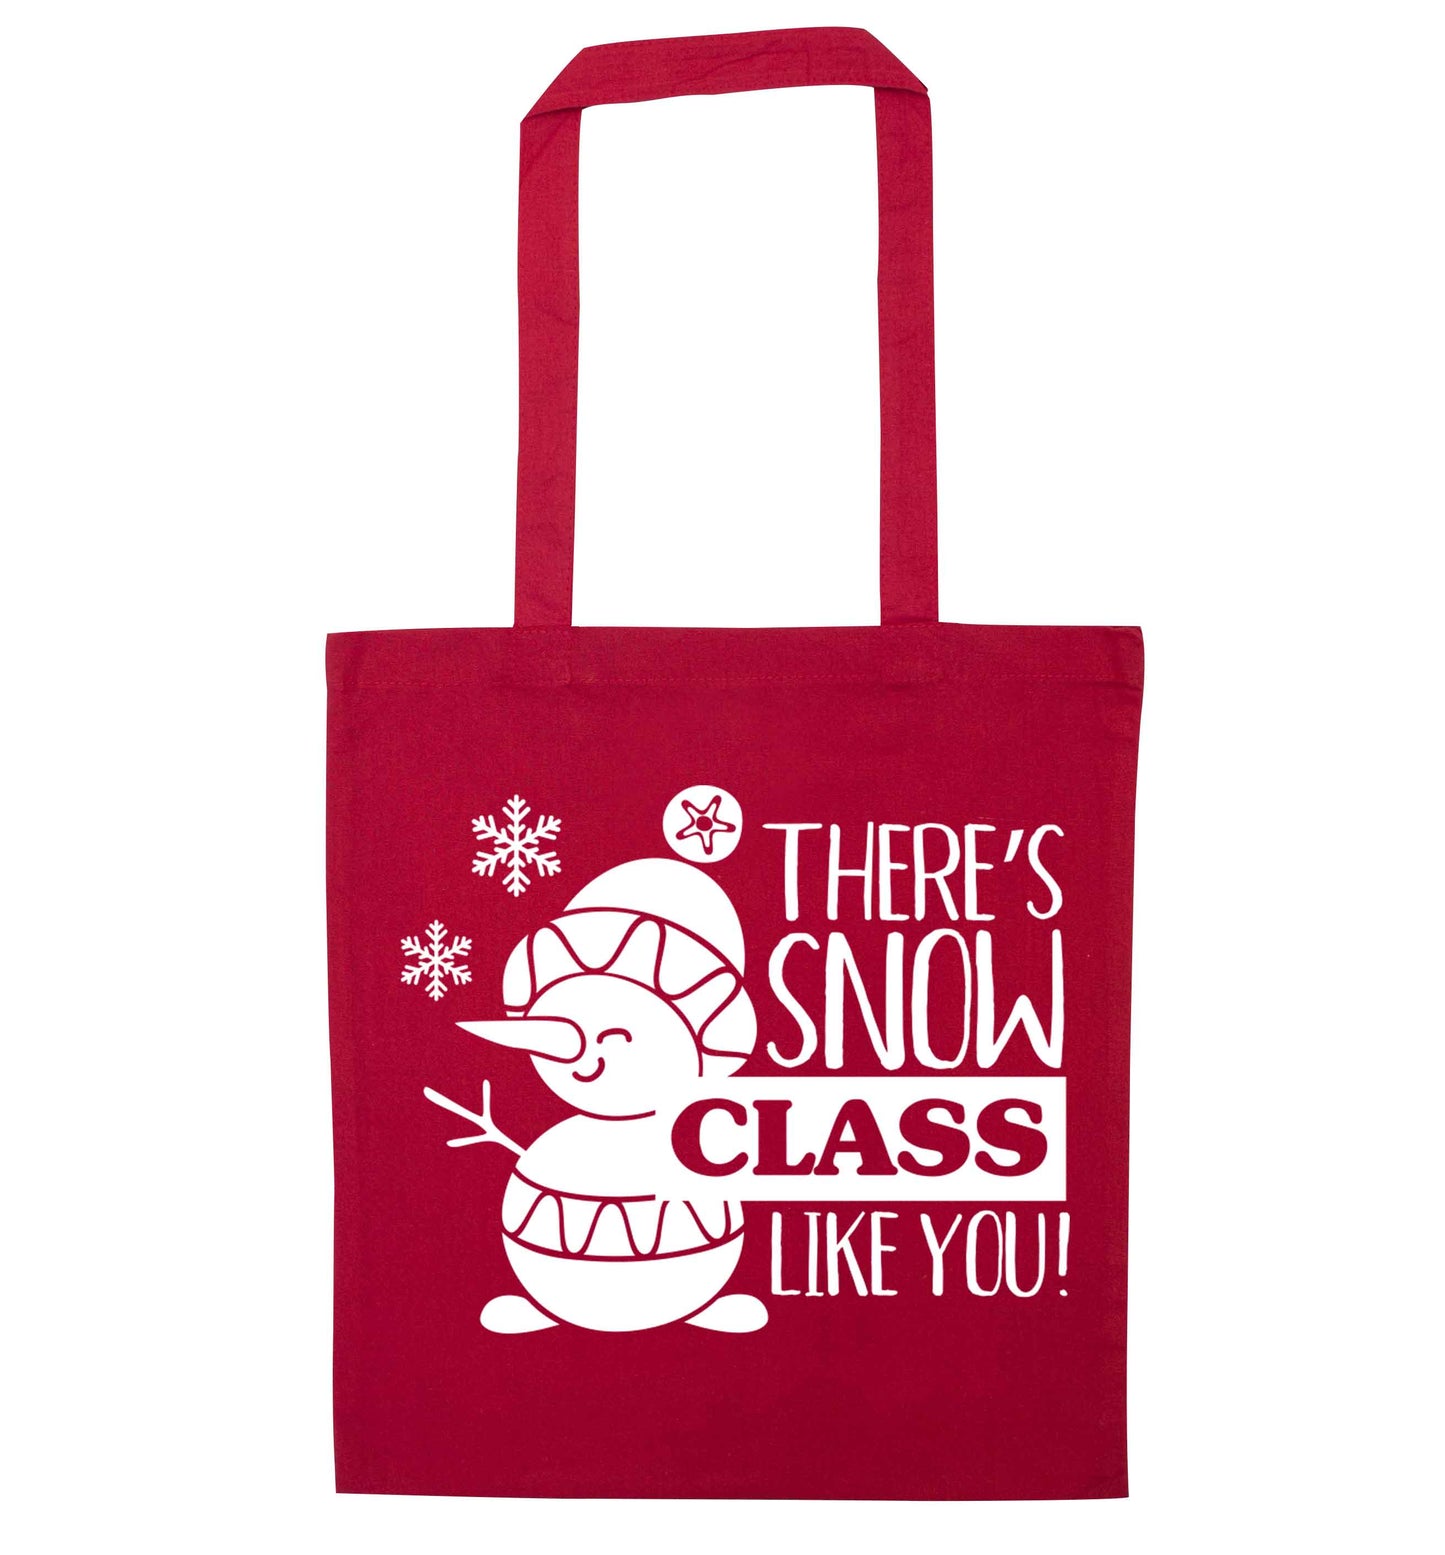 There's snow class like you red tote bag